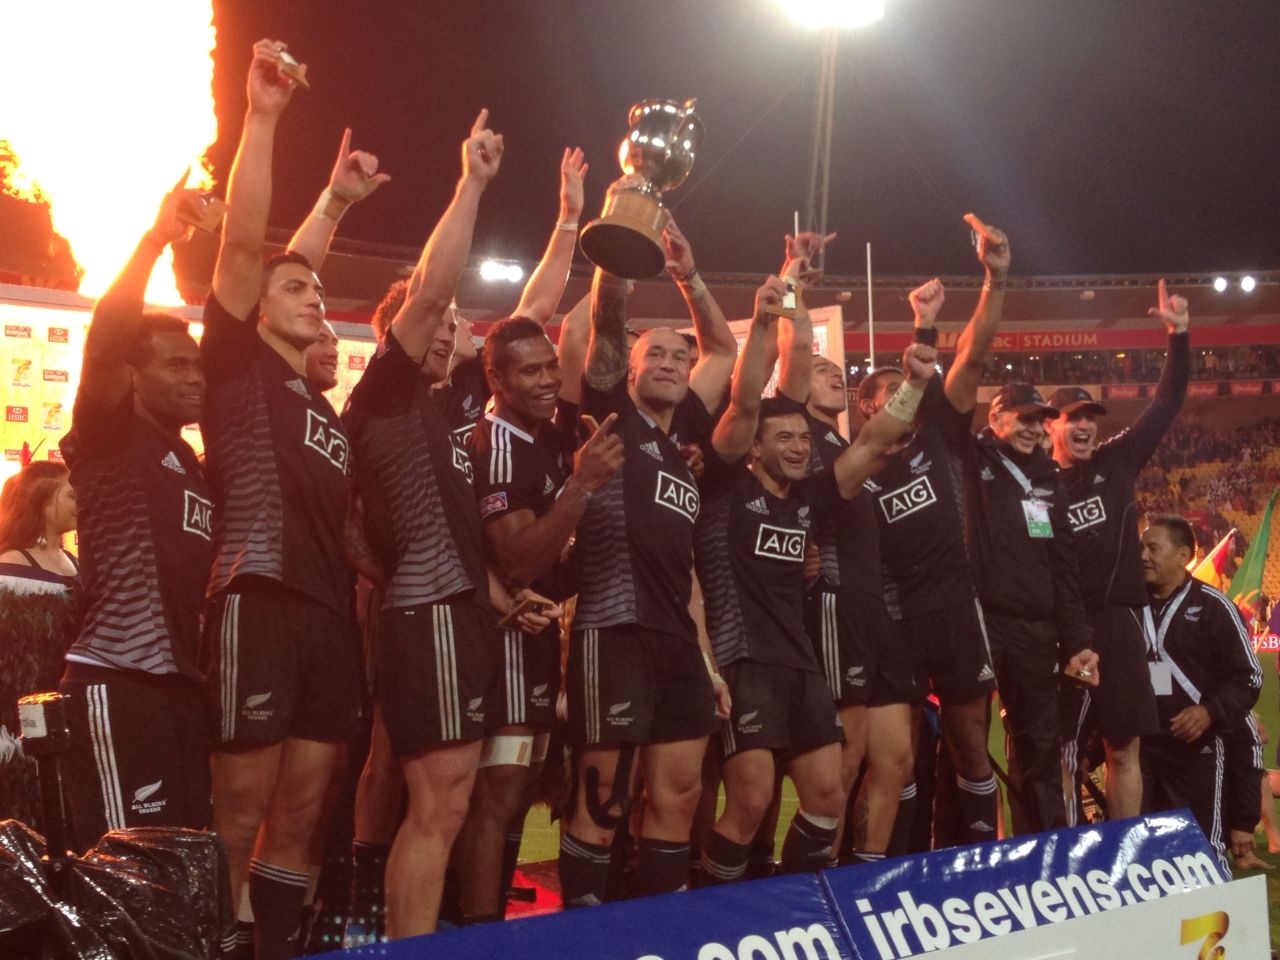 The All Blacks' victory in the final against South Africa was greeted by the usual fireworks at such events.